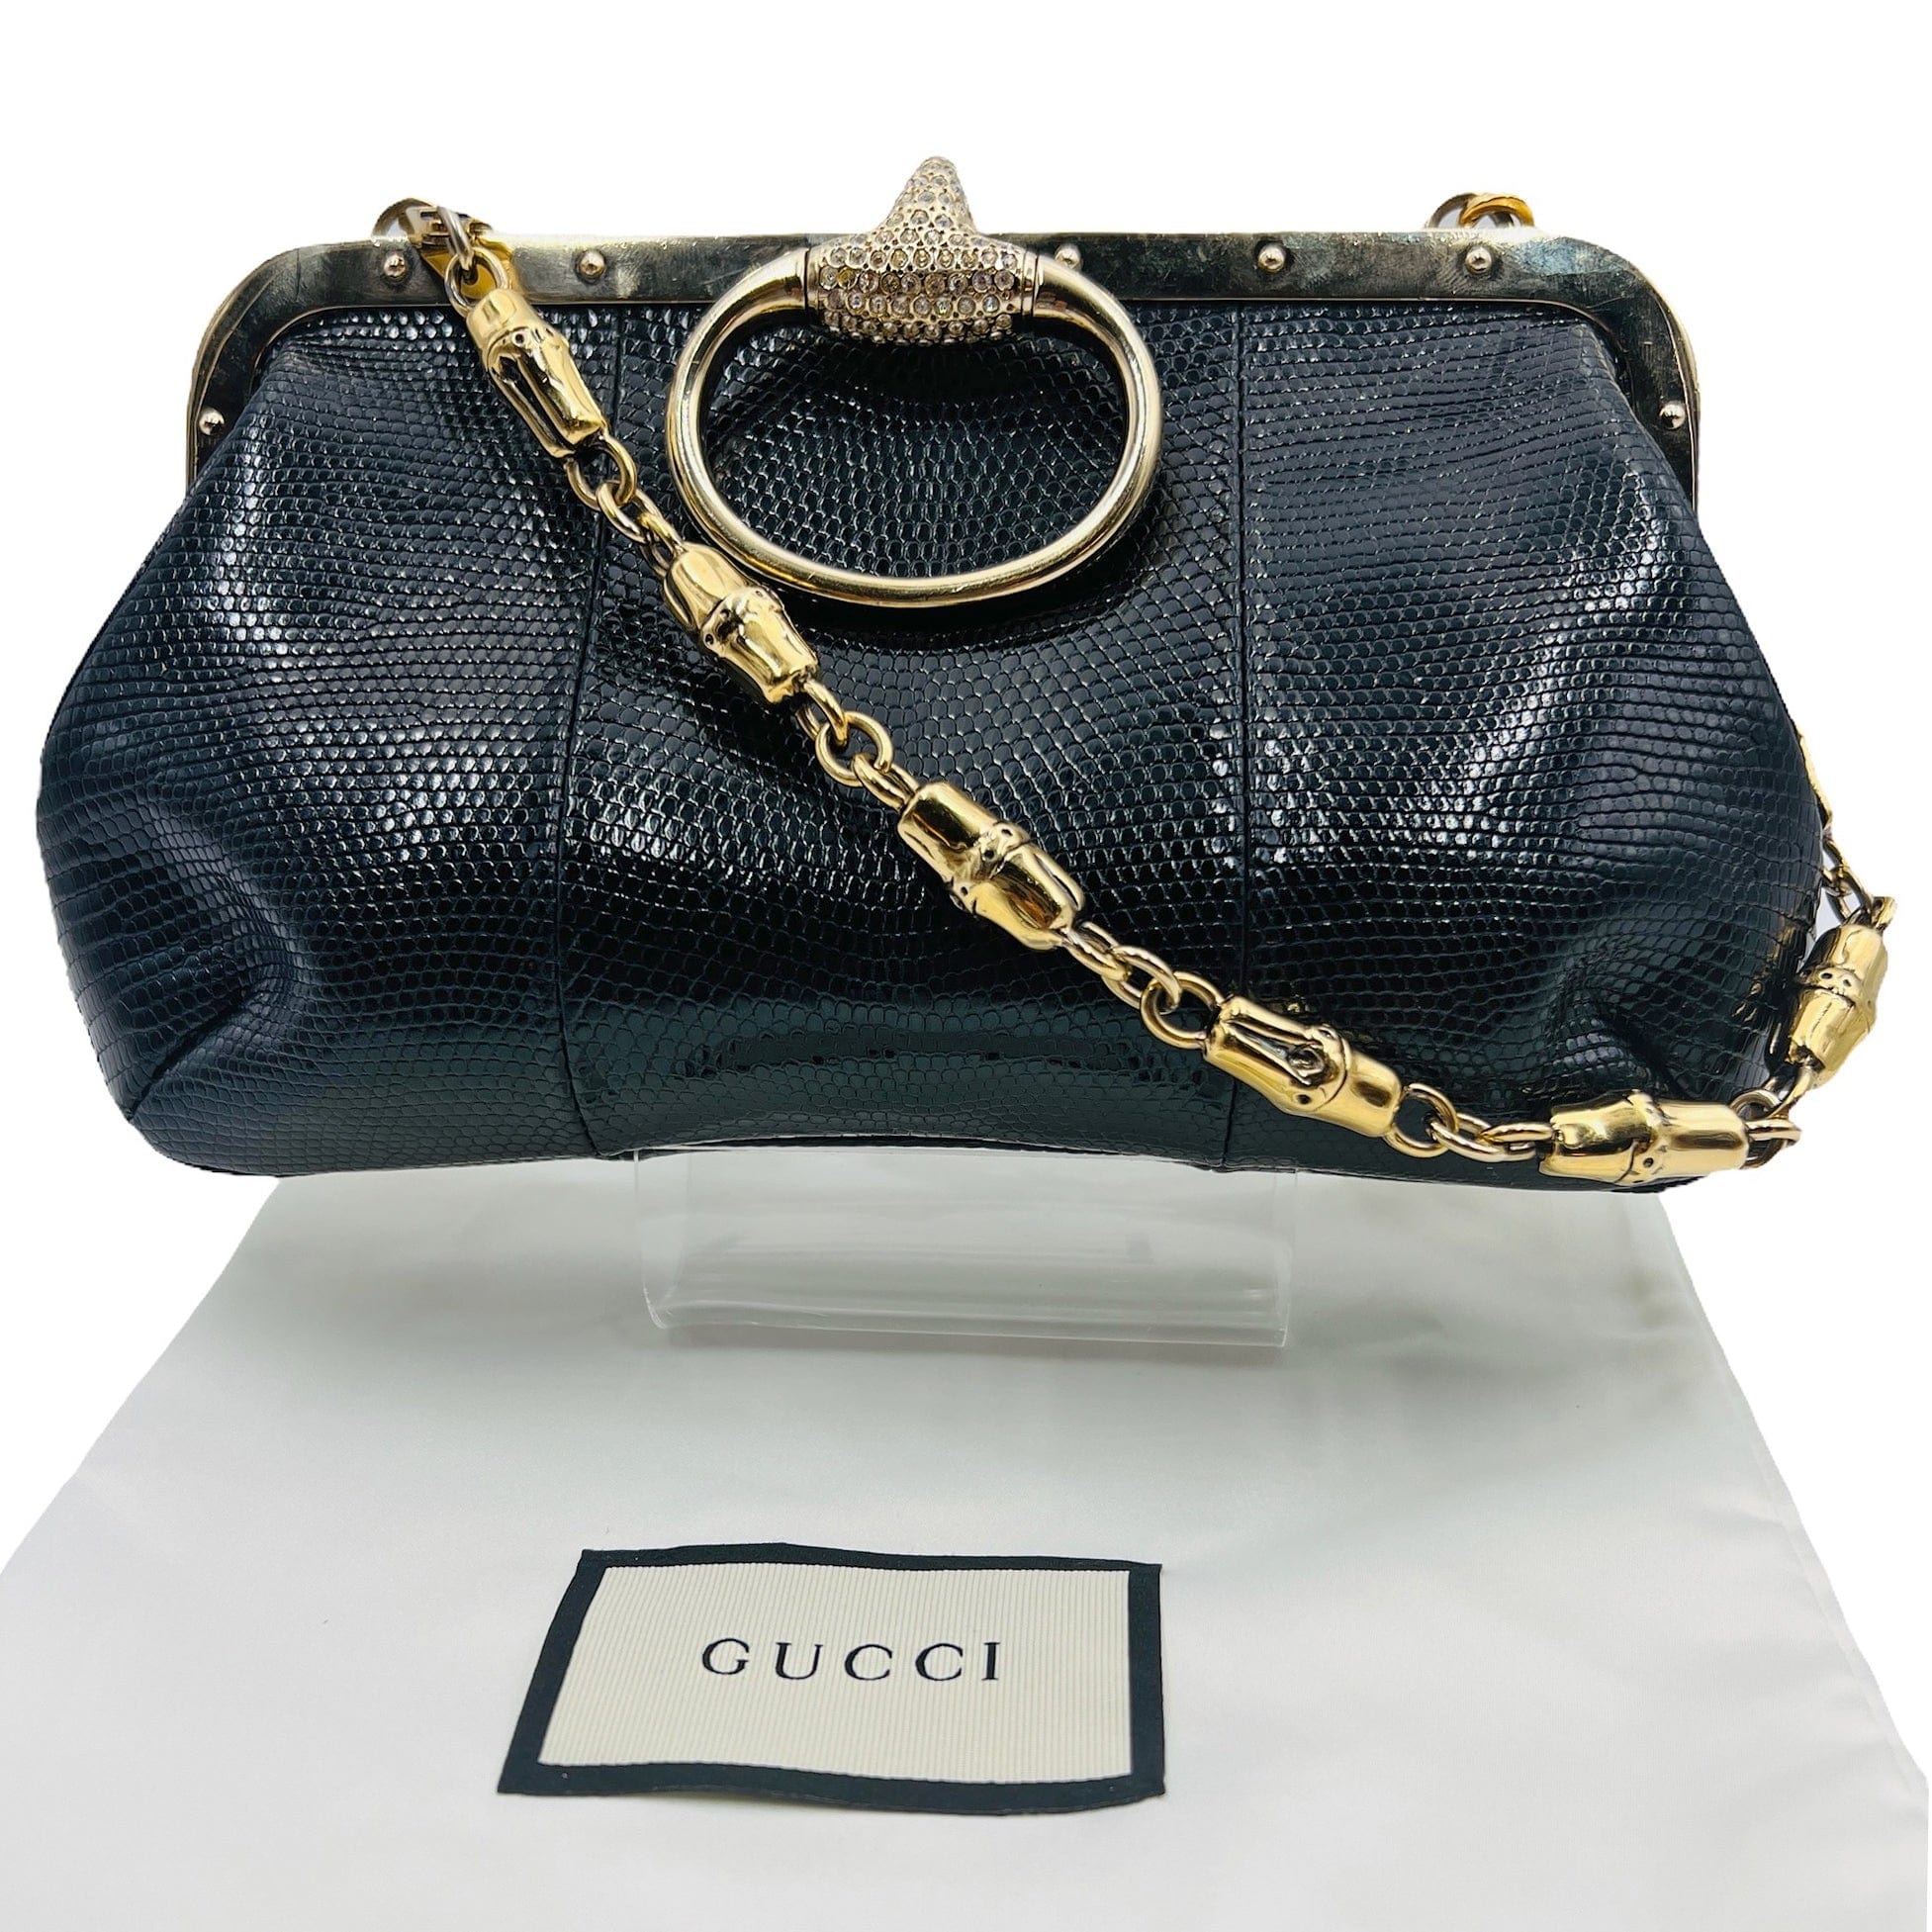 GUCCI Collectible Vintage Tom Ford Designed Lizard Leather Bag - Wag N' Purr Shop